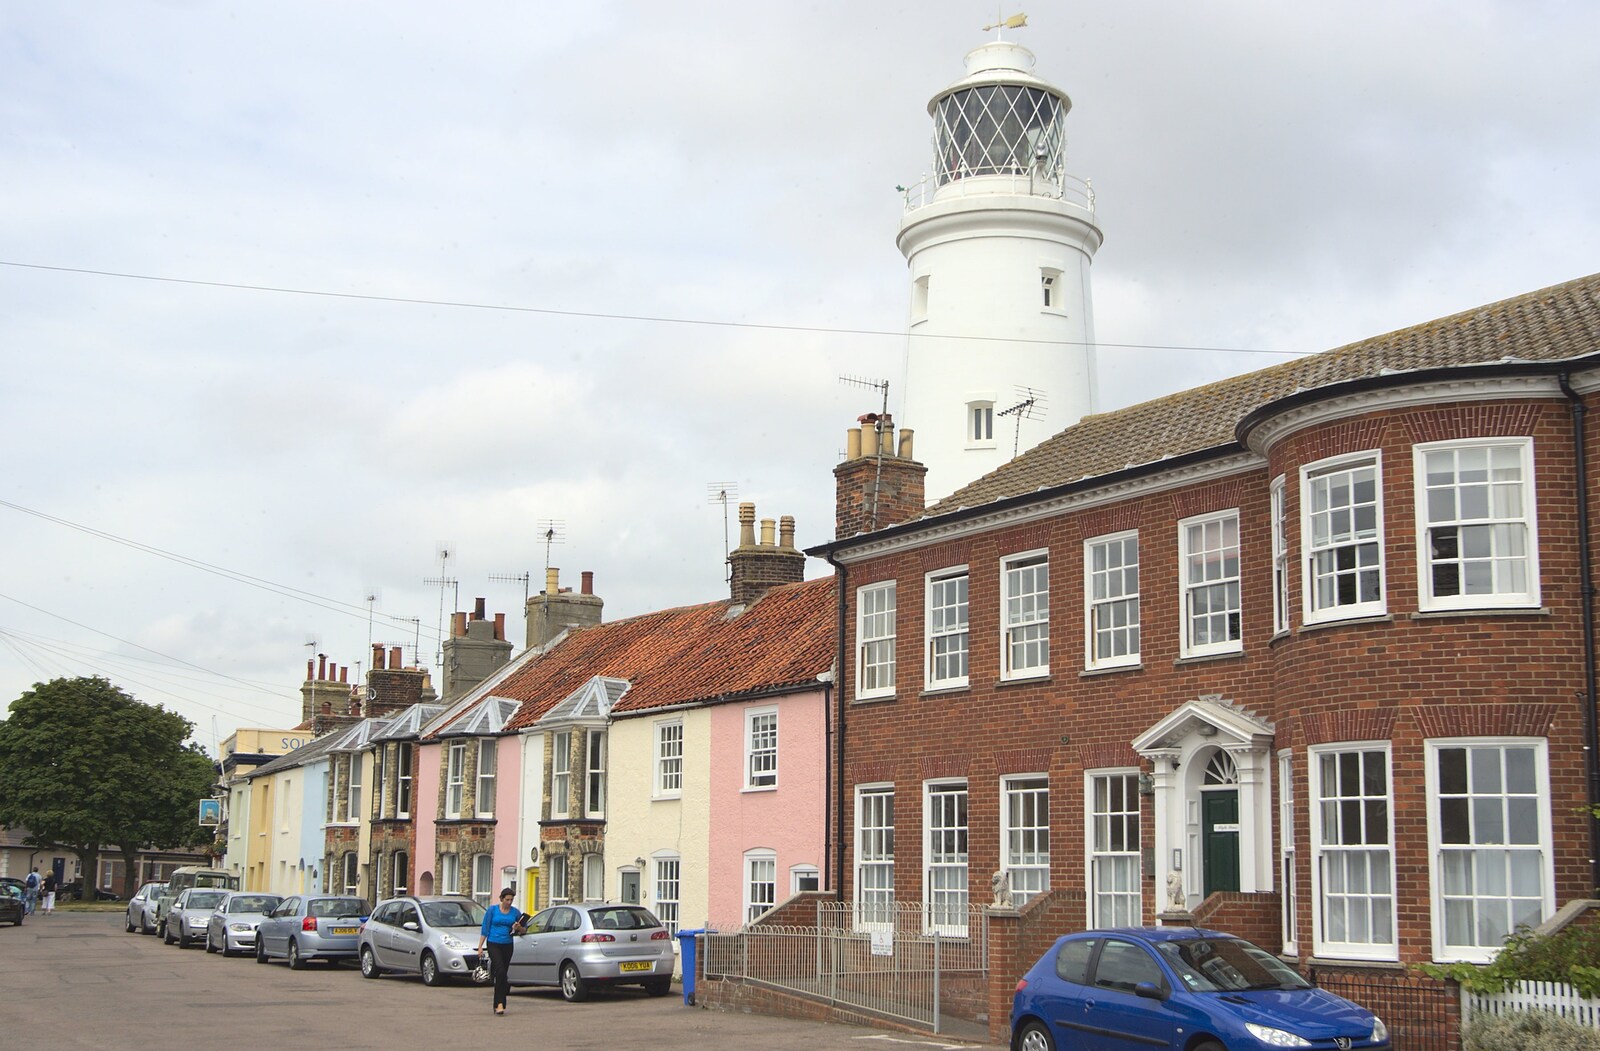 The lighthouse on St. James Green from A "Minimoon" and an Adnams Brewery Trip, Southwold, Suffolk - 7th July 2010